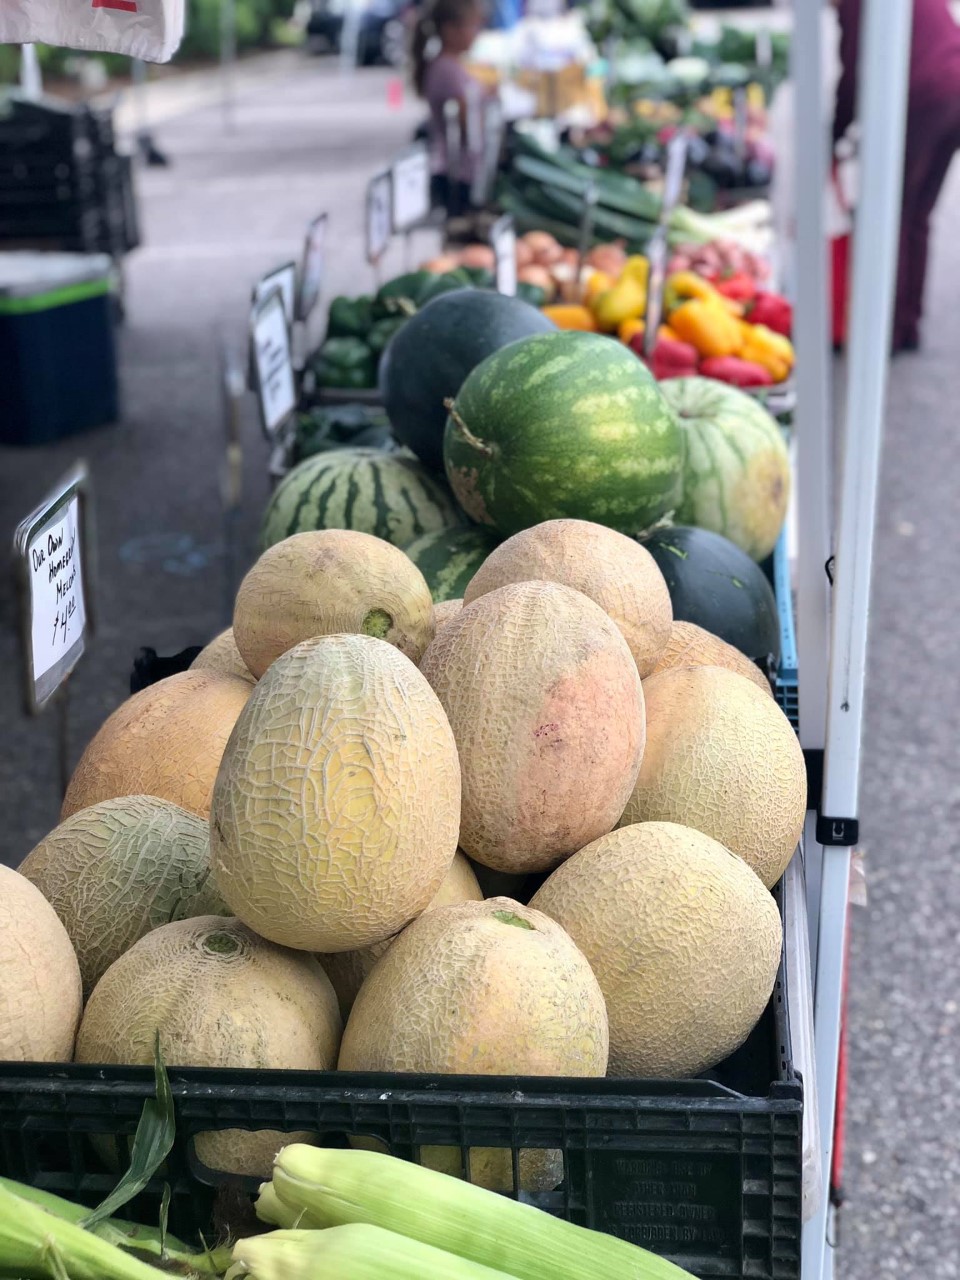 Melons at the Farmers Market